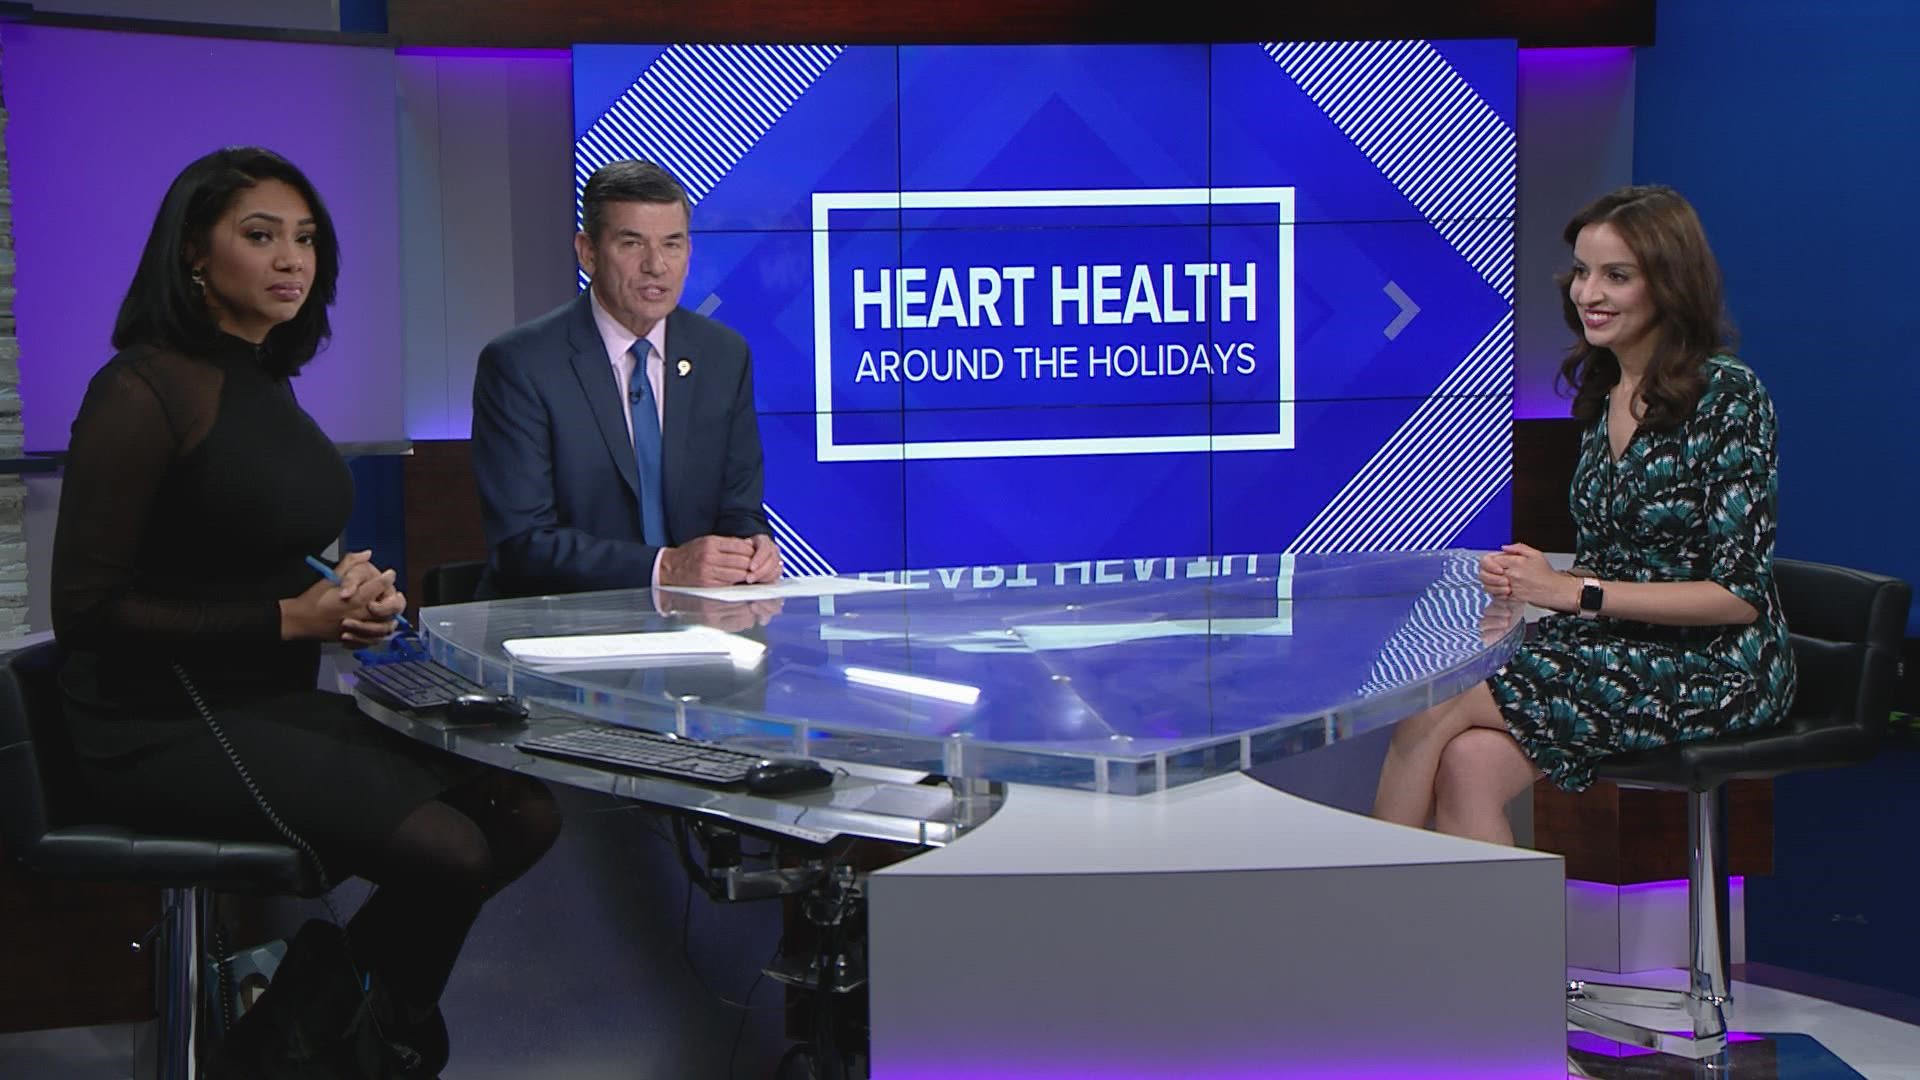 9NEWS Medical Expert Dr. Payal Kohli is a cardiologist who discusses reasons for increased risk of heart problems during the holidays.